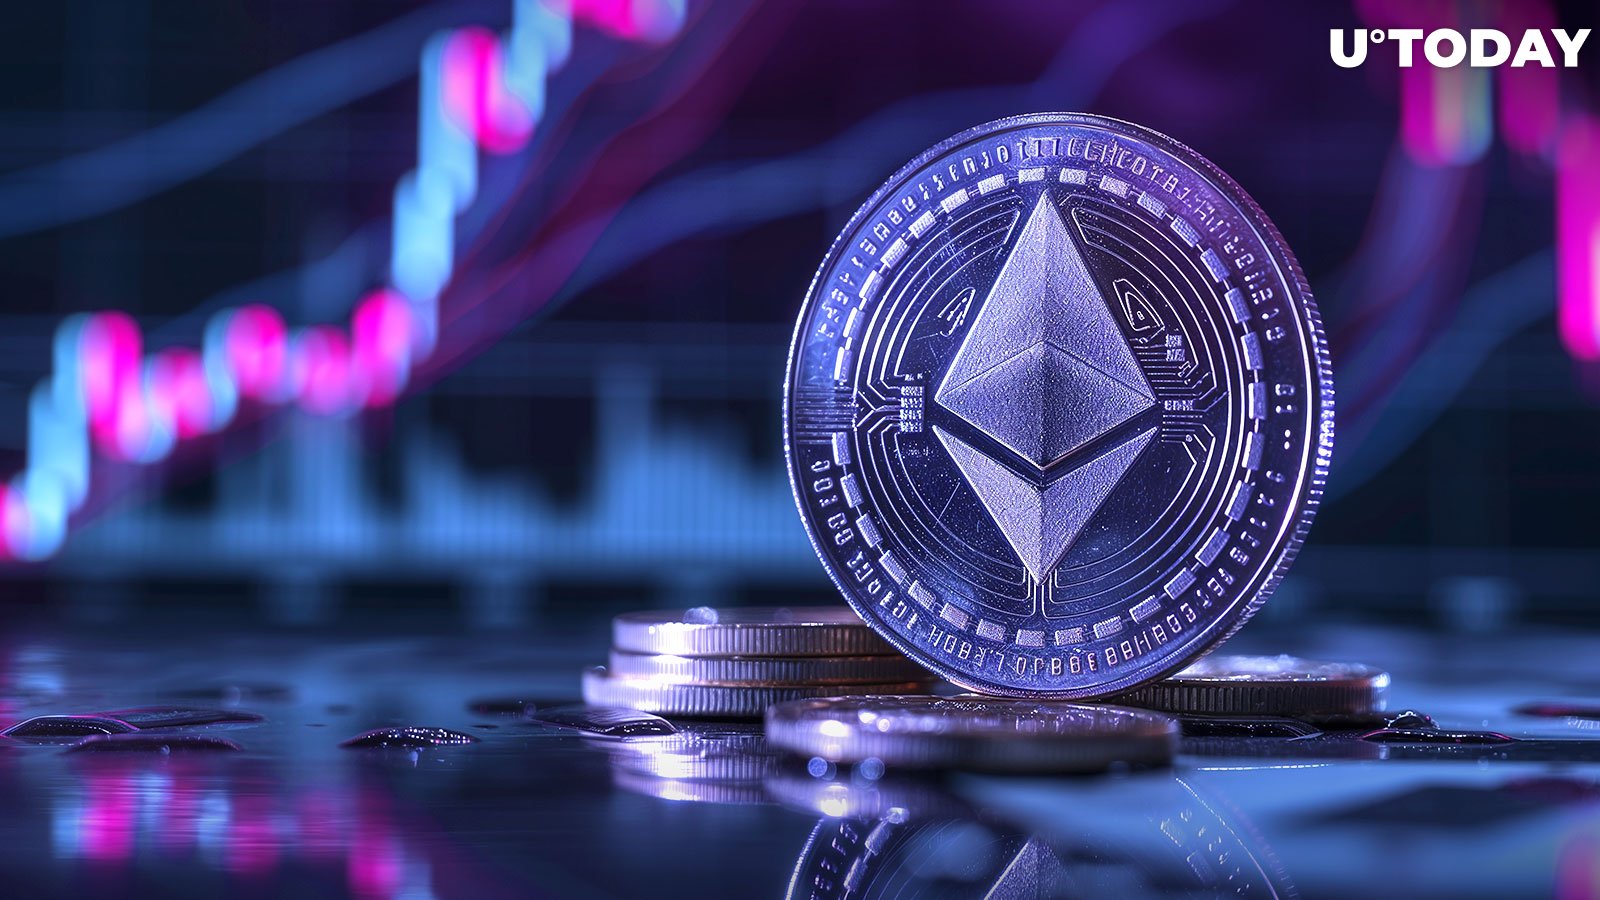 Ethereum (ETH) to Hit $5,000 After Major Move, Says Top Analyst